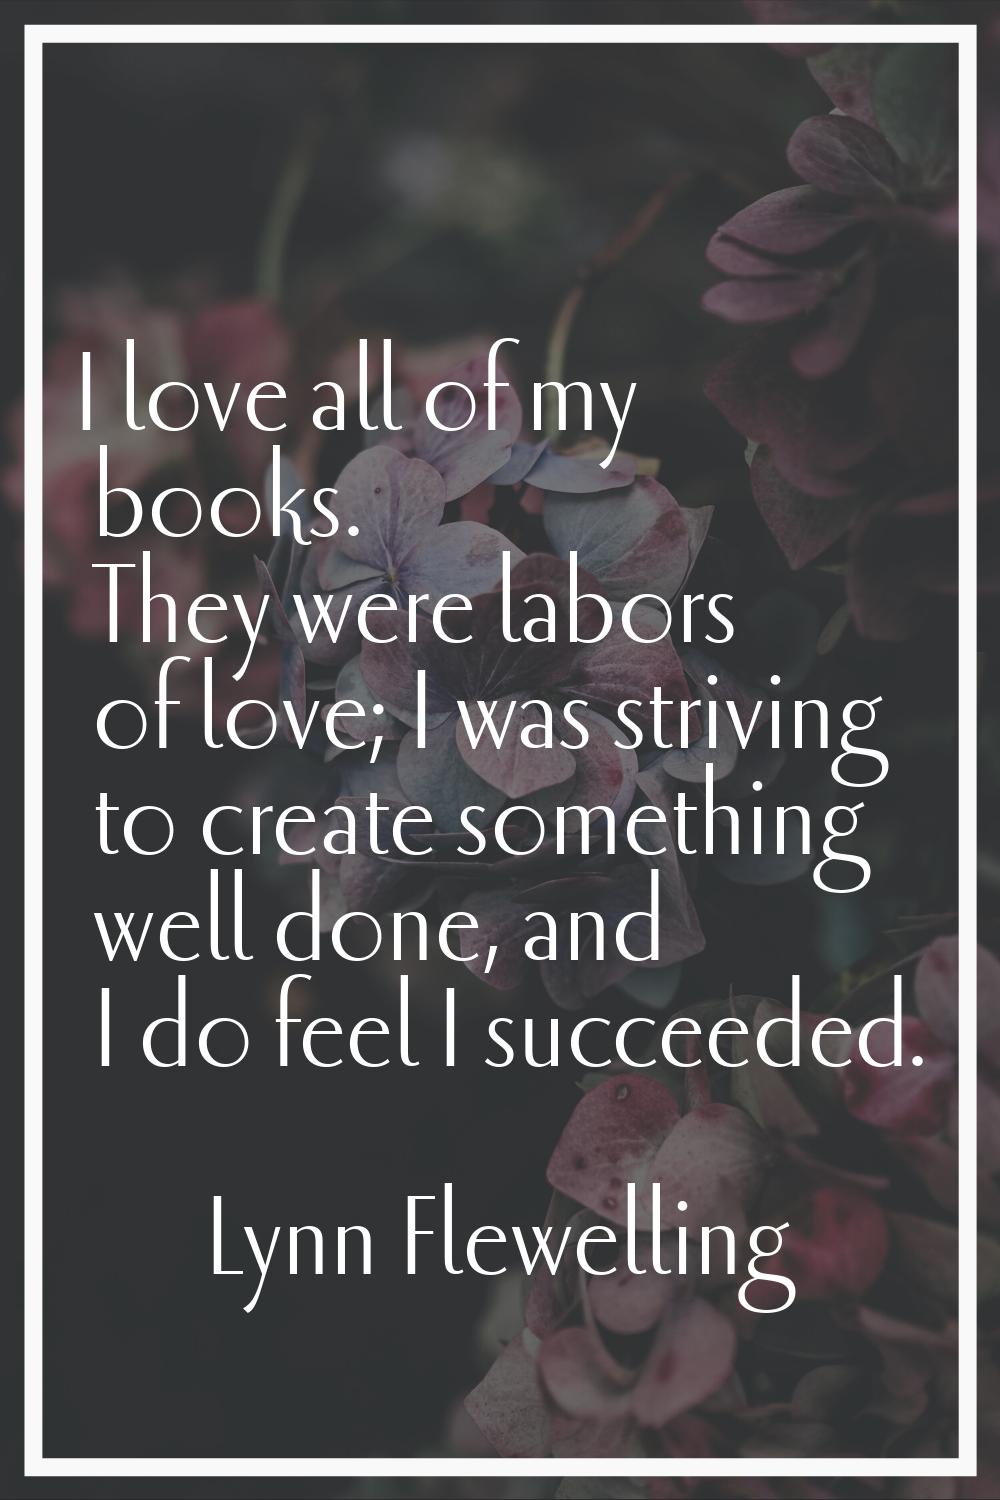 I love all of my books. They were labors of love; I was striving to create something well done, and